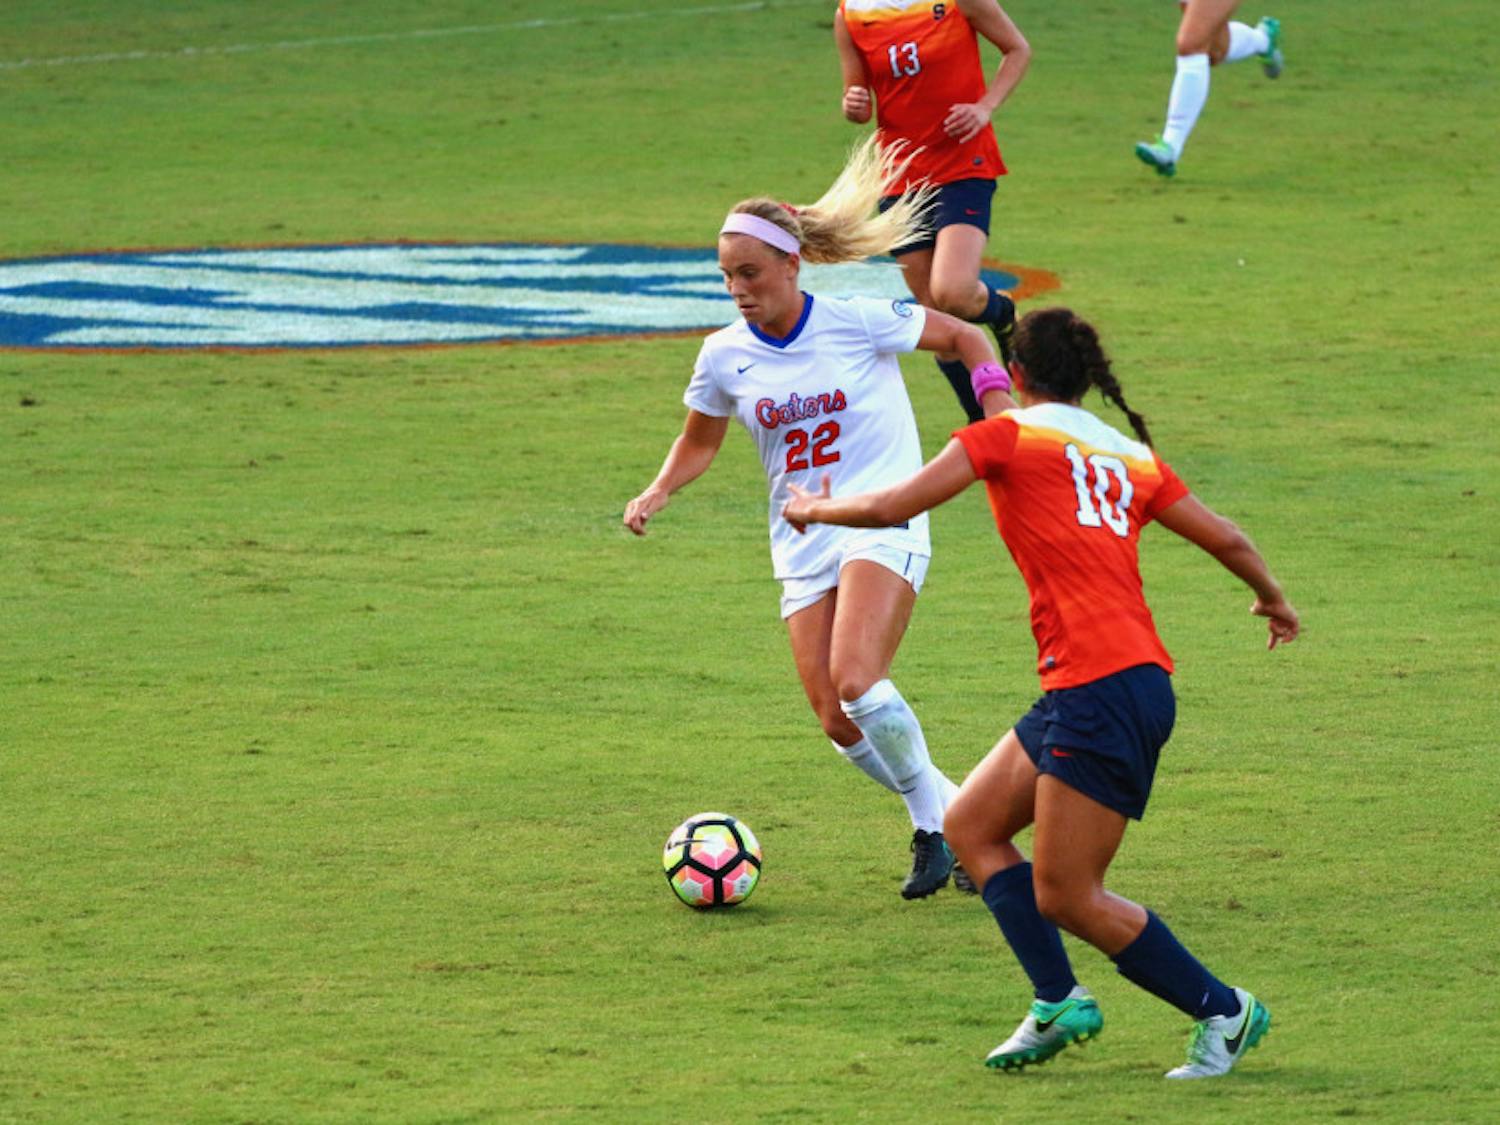 Parker Roberts dribbles the ball during Florida's 2-1 win against Syracuse on August 27, at Donald R. Dizney Stadium.